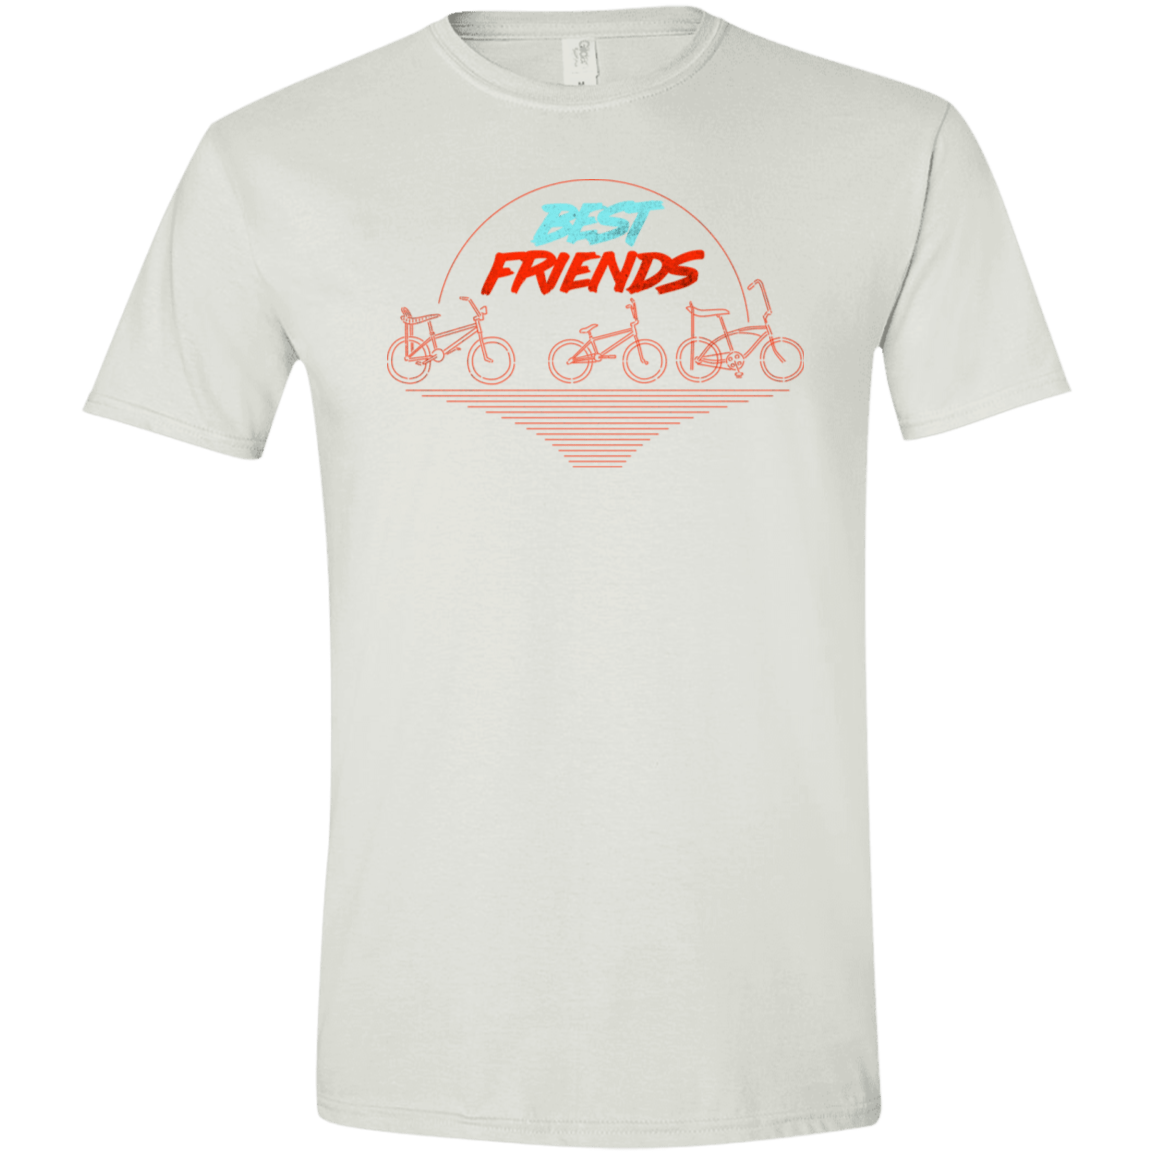 T-Shirts White / X-Small Best Friends Men's Semi-Fitted Softstyle